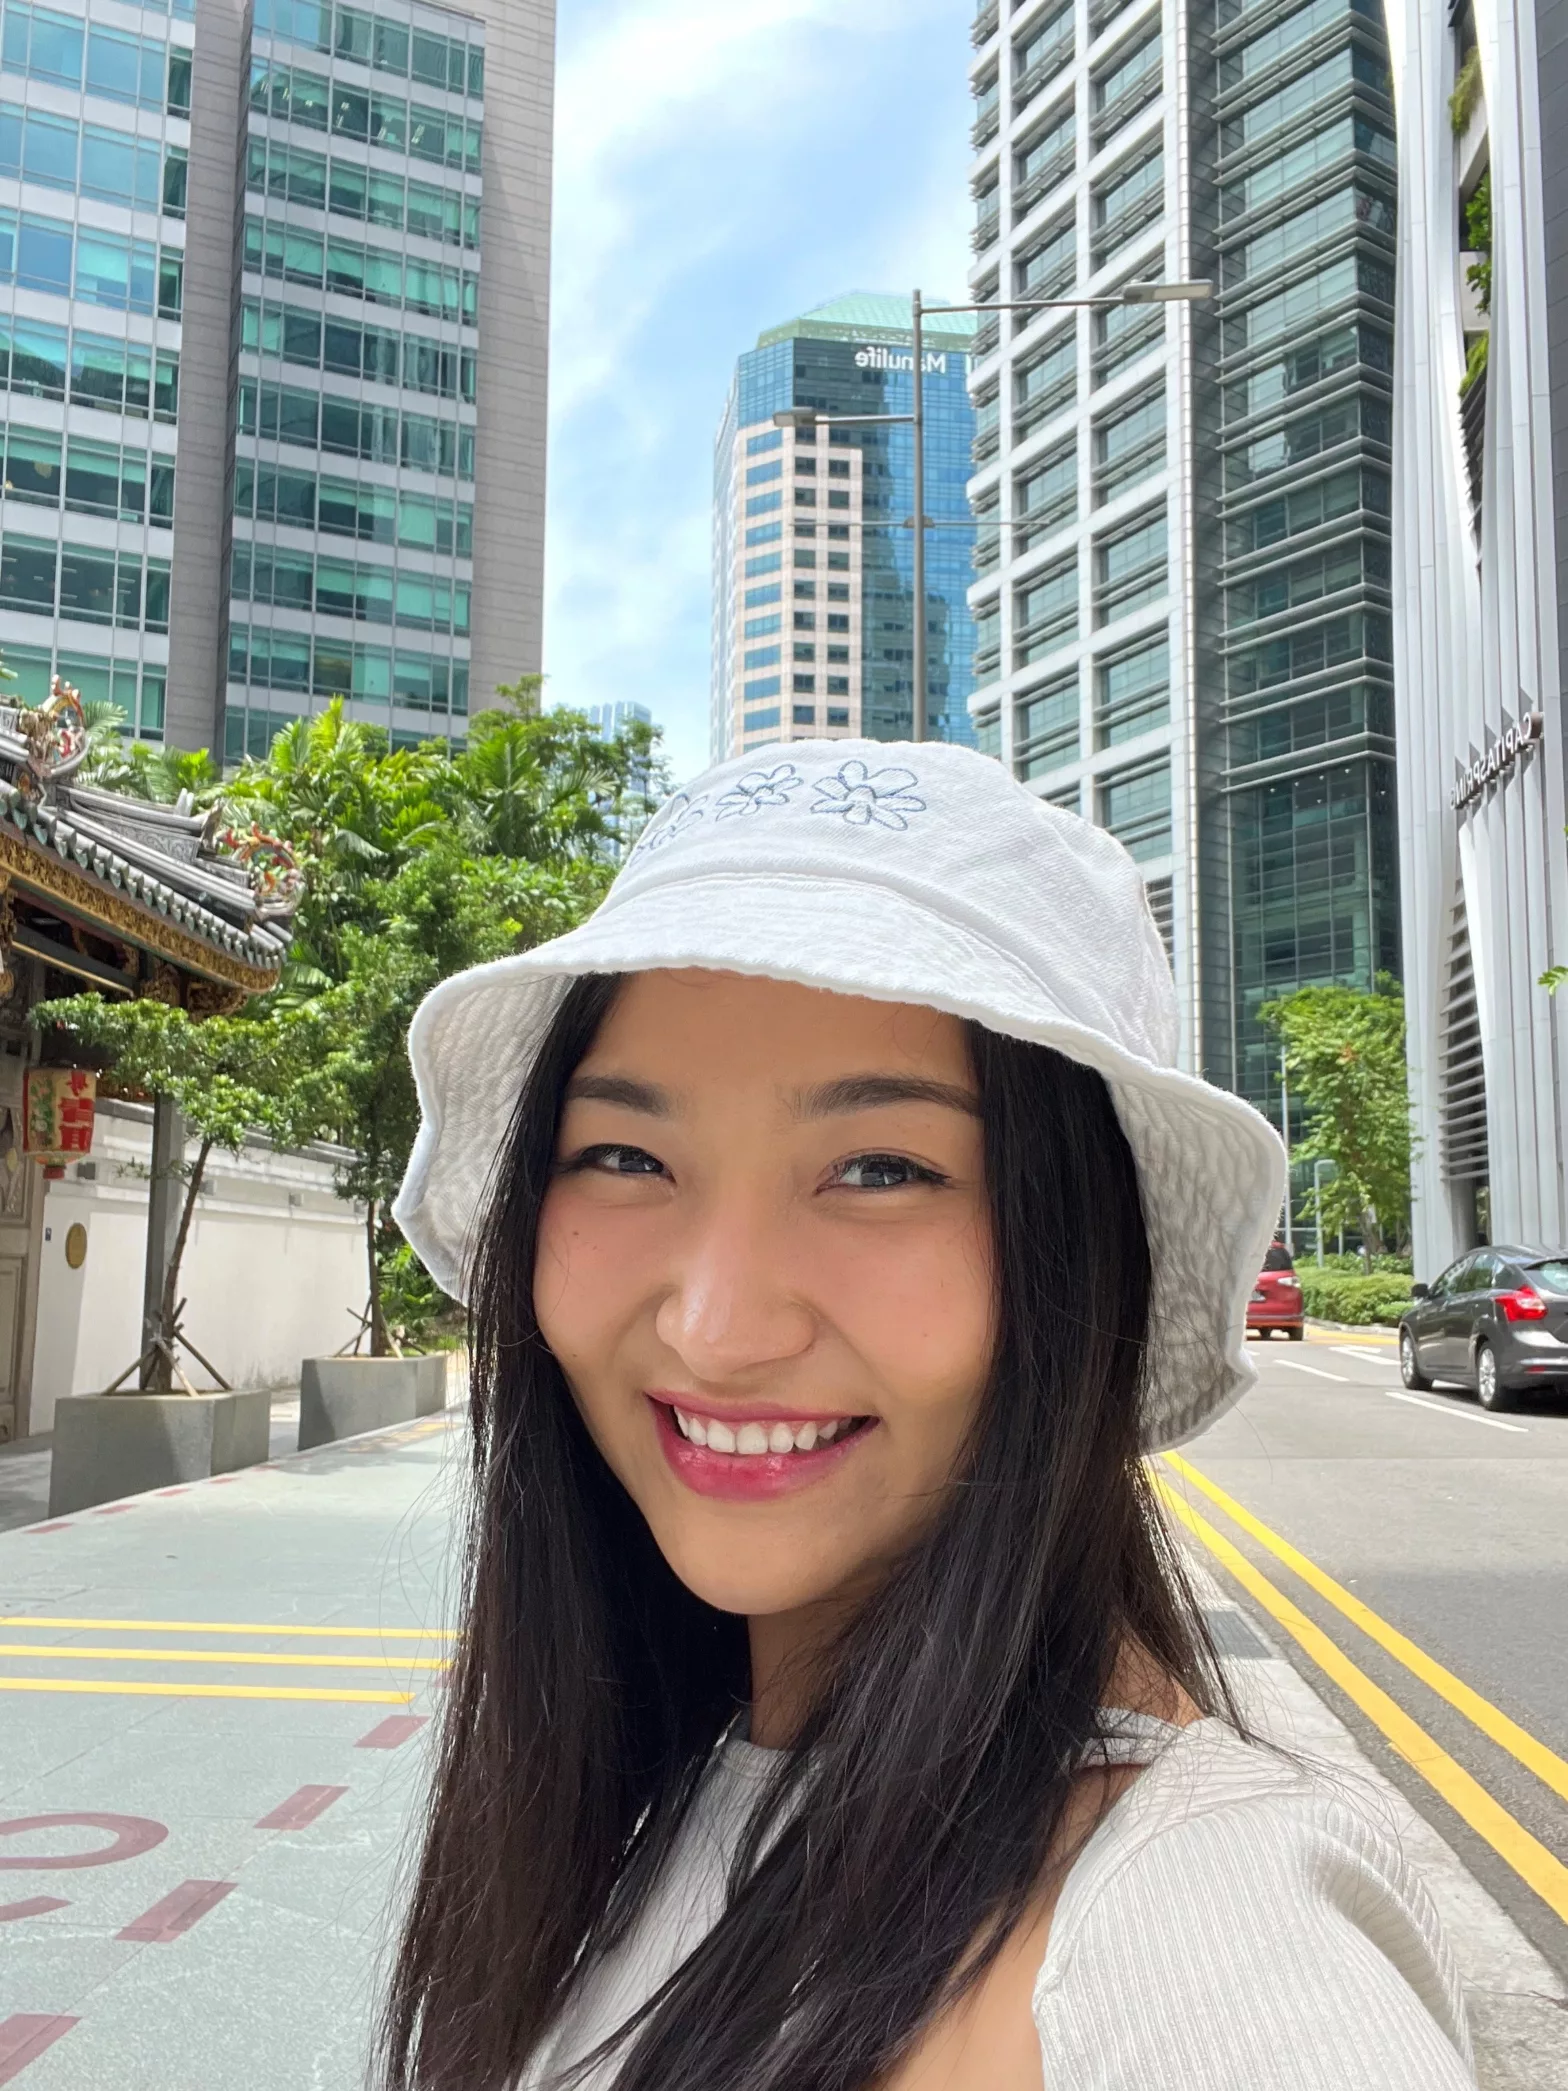 A young woman with black hair and a white hat stands in the middle of a city block with tall buildings in the background